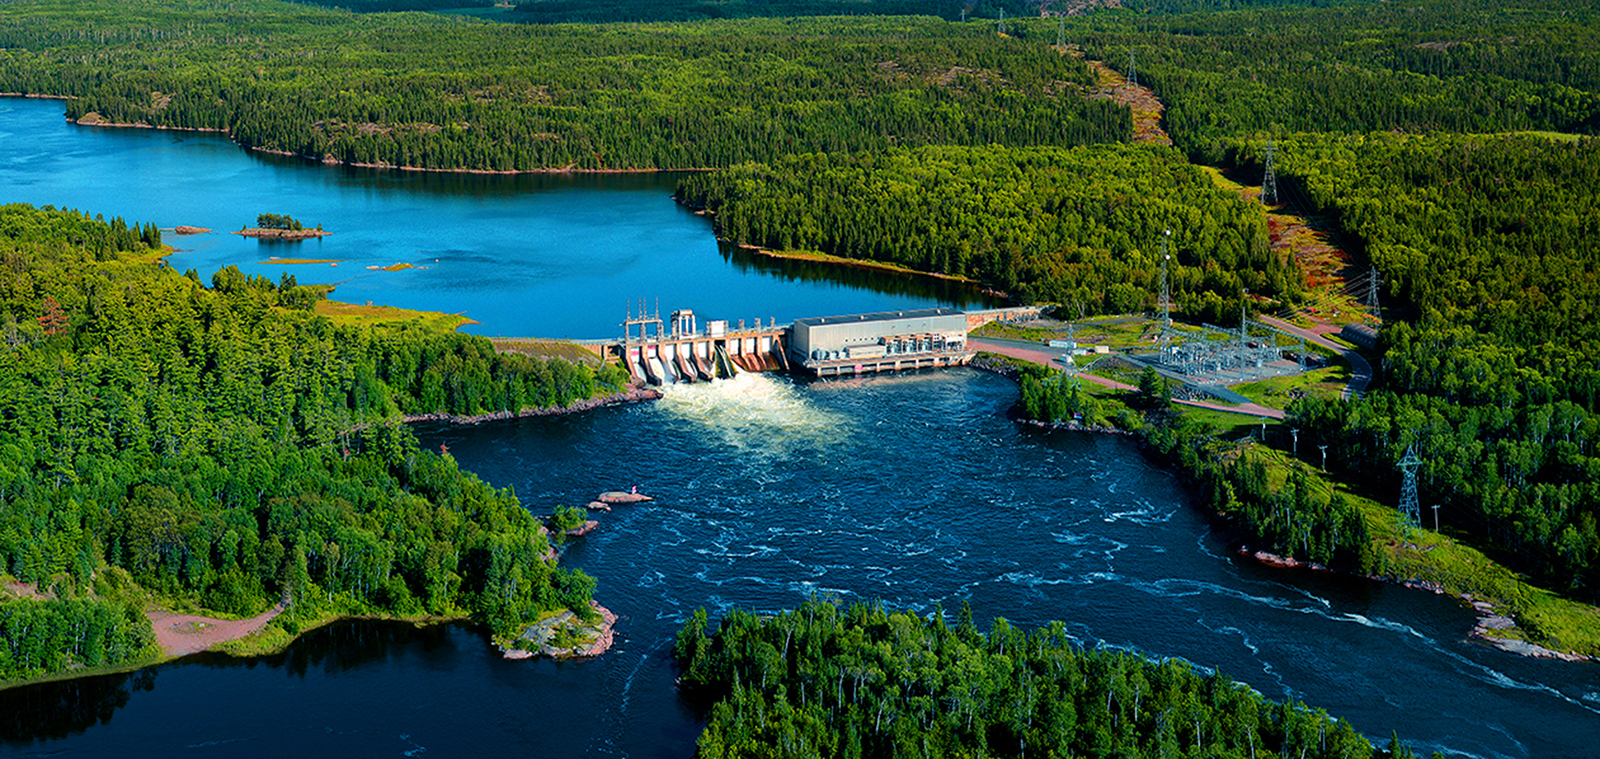 An aerial view of Whitedog Falls hydroelectric station.